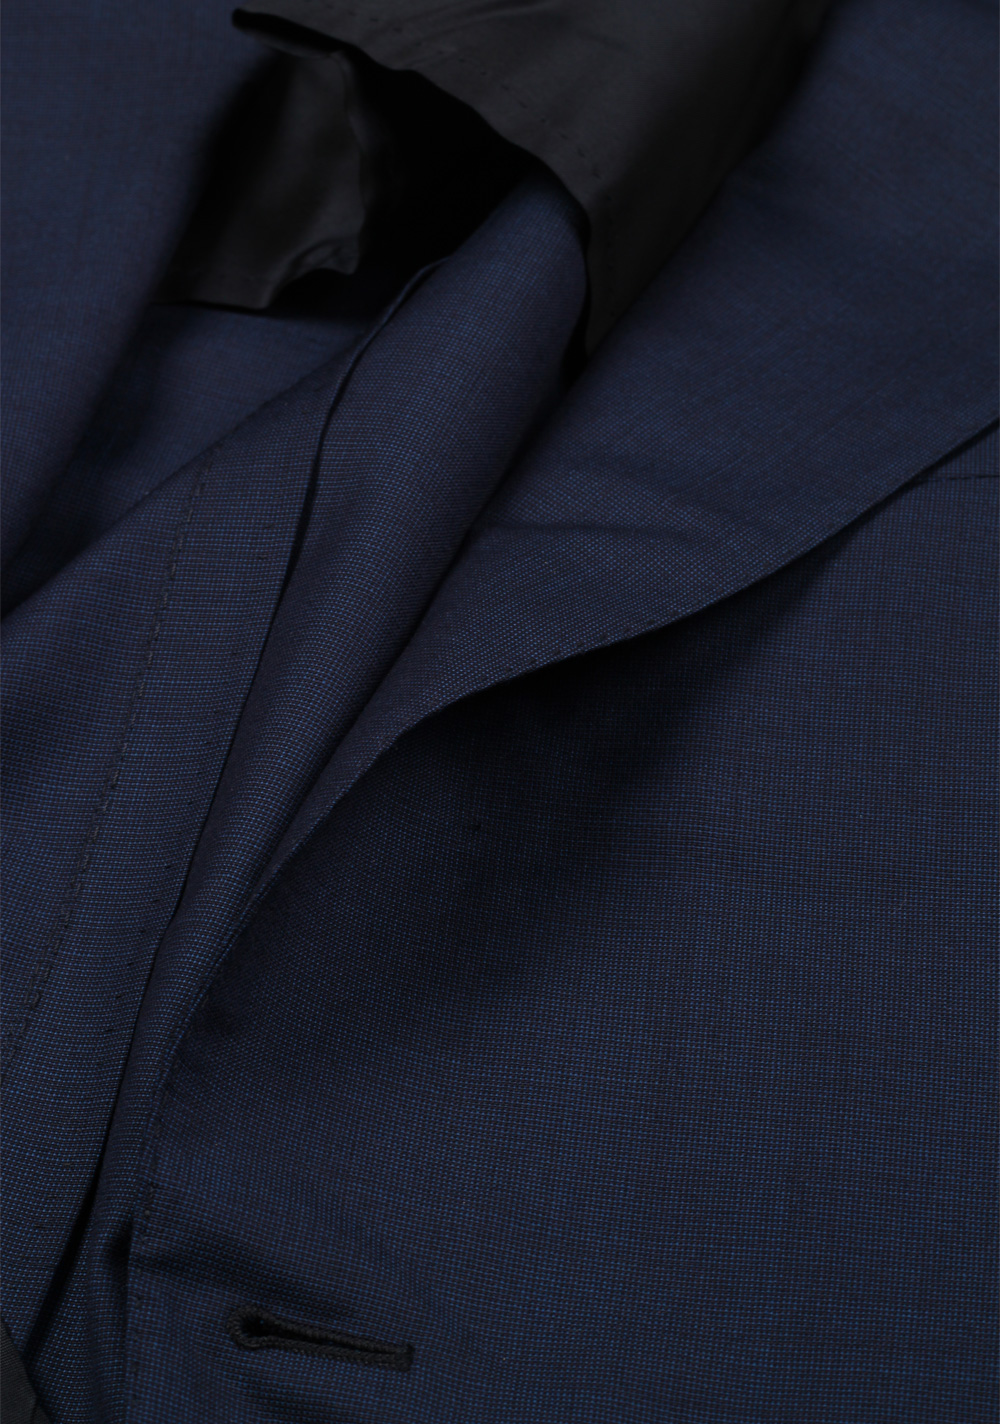 TOM FORD Shelton Blue Suit Size 48 / 38R U.S. In Wool | Costume Limité